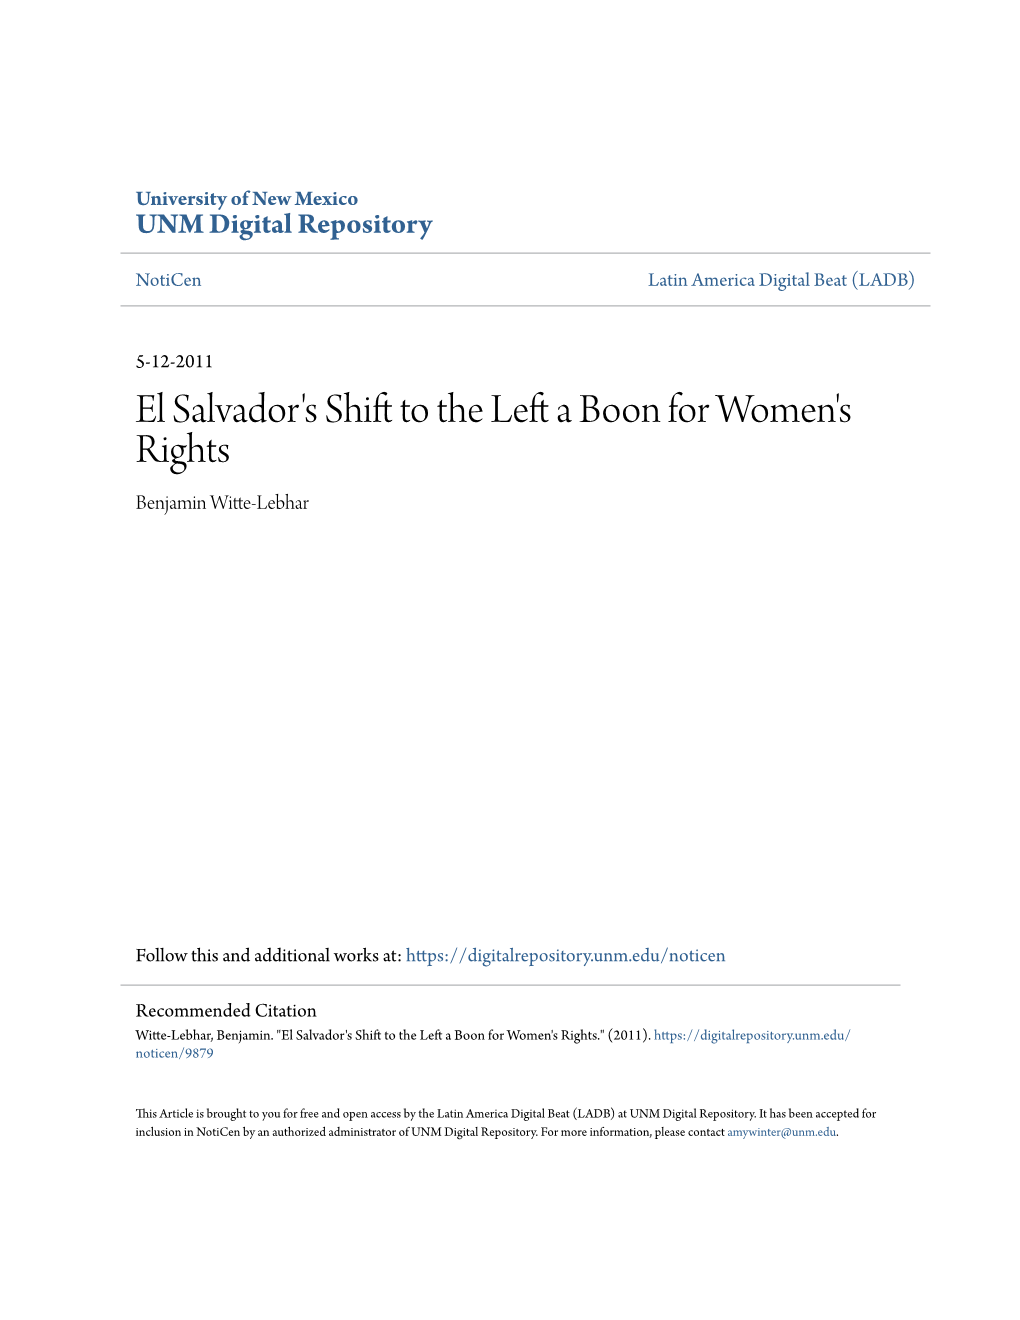 El Salvador's Shift to the Left a Boon for Women's Rights by Benjamin Witte-Lebhar Category/Department: El Salvador Published: Thursday, May 12, 2011